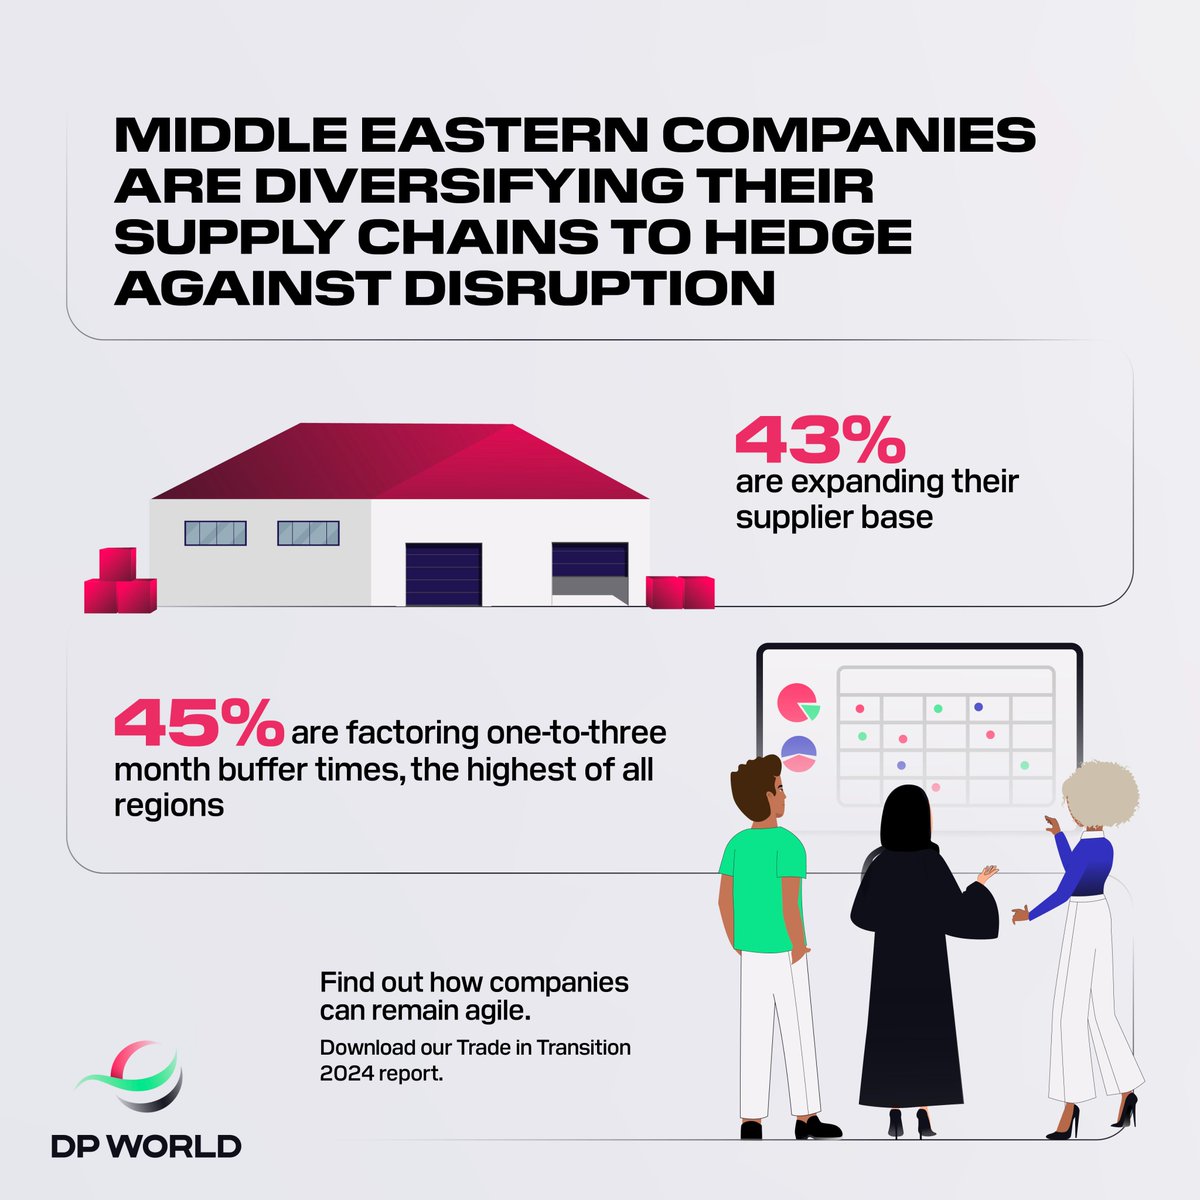 Amidst global trade uncertainty, Middle Eastern companies are diversifying their supply chains. Download our Trade in Transition report by @economistimpact: ow.ly/E1Fp50RvxwC #TradeinTransition